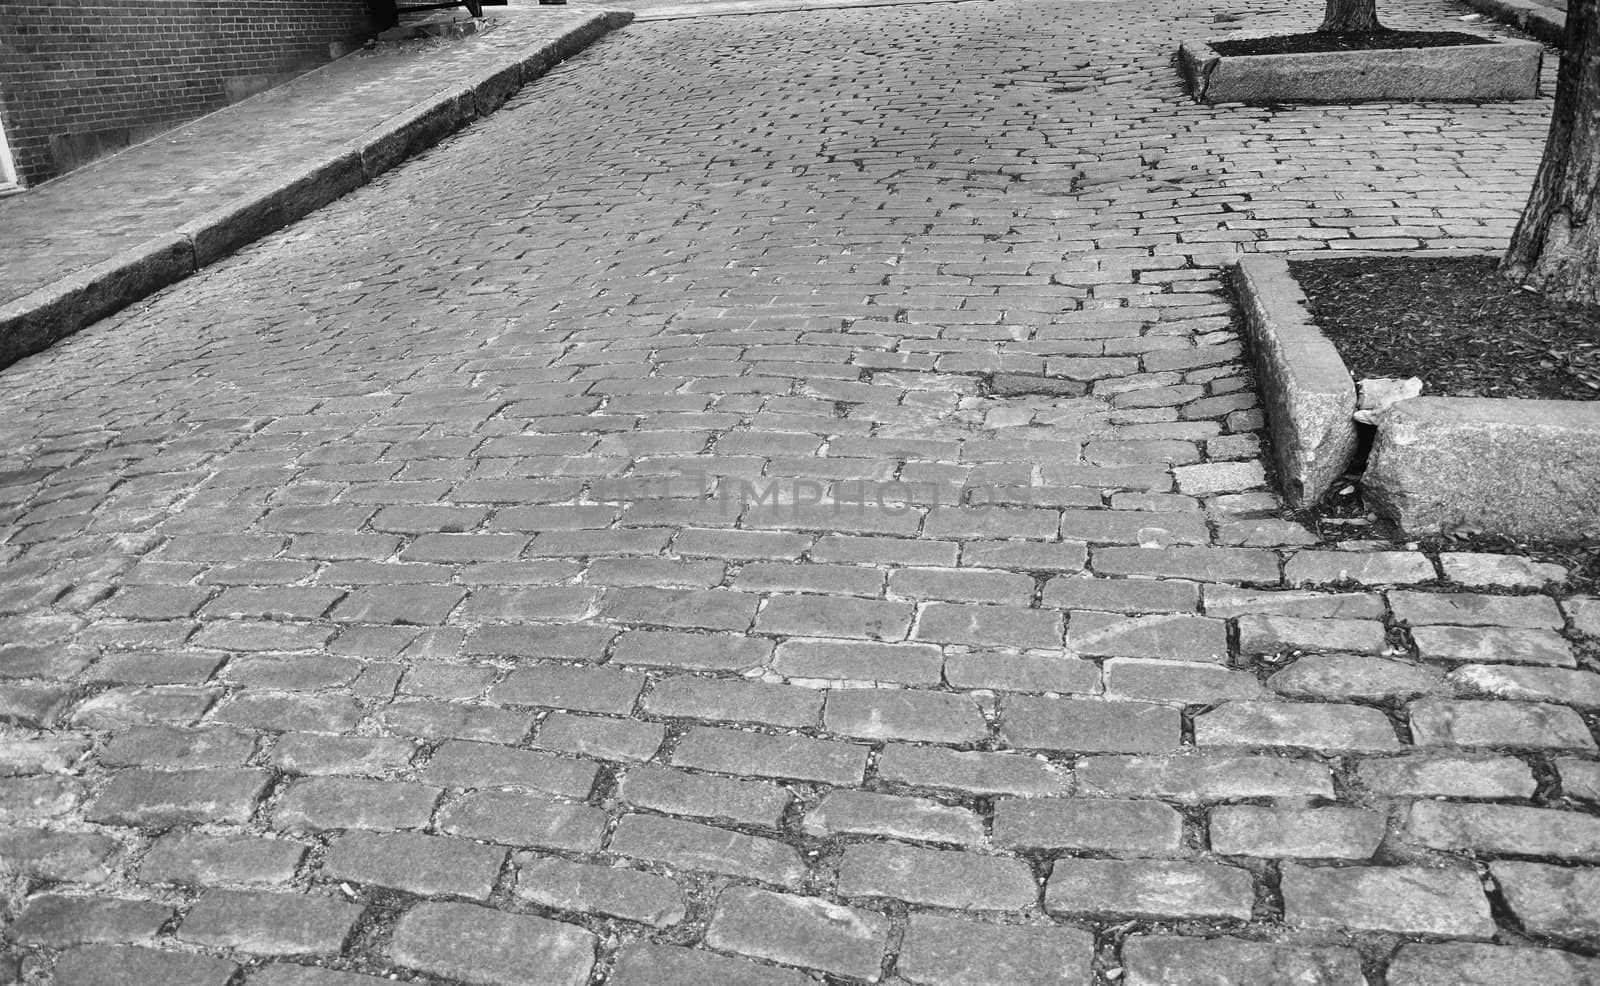 An old cobblestone road shown in black and white.